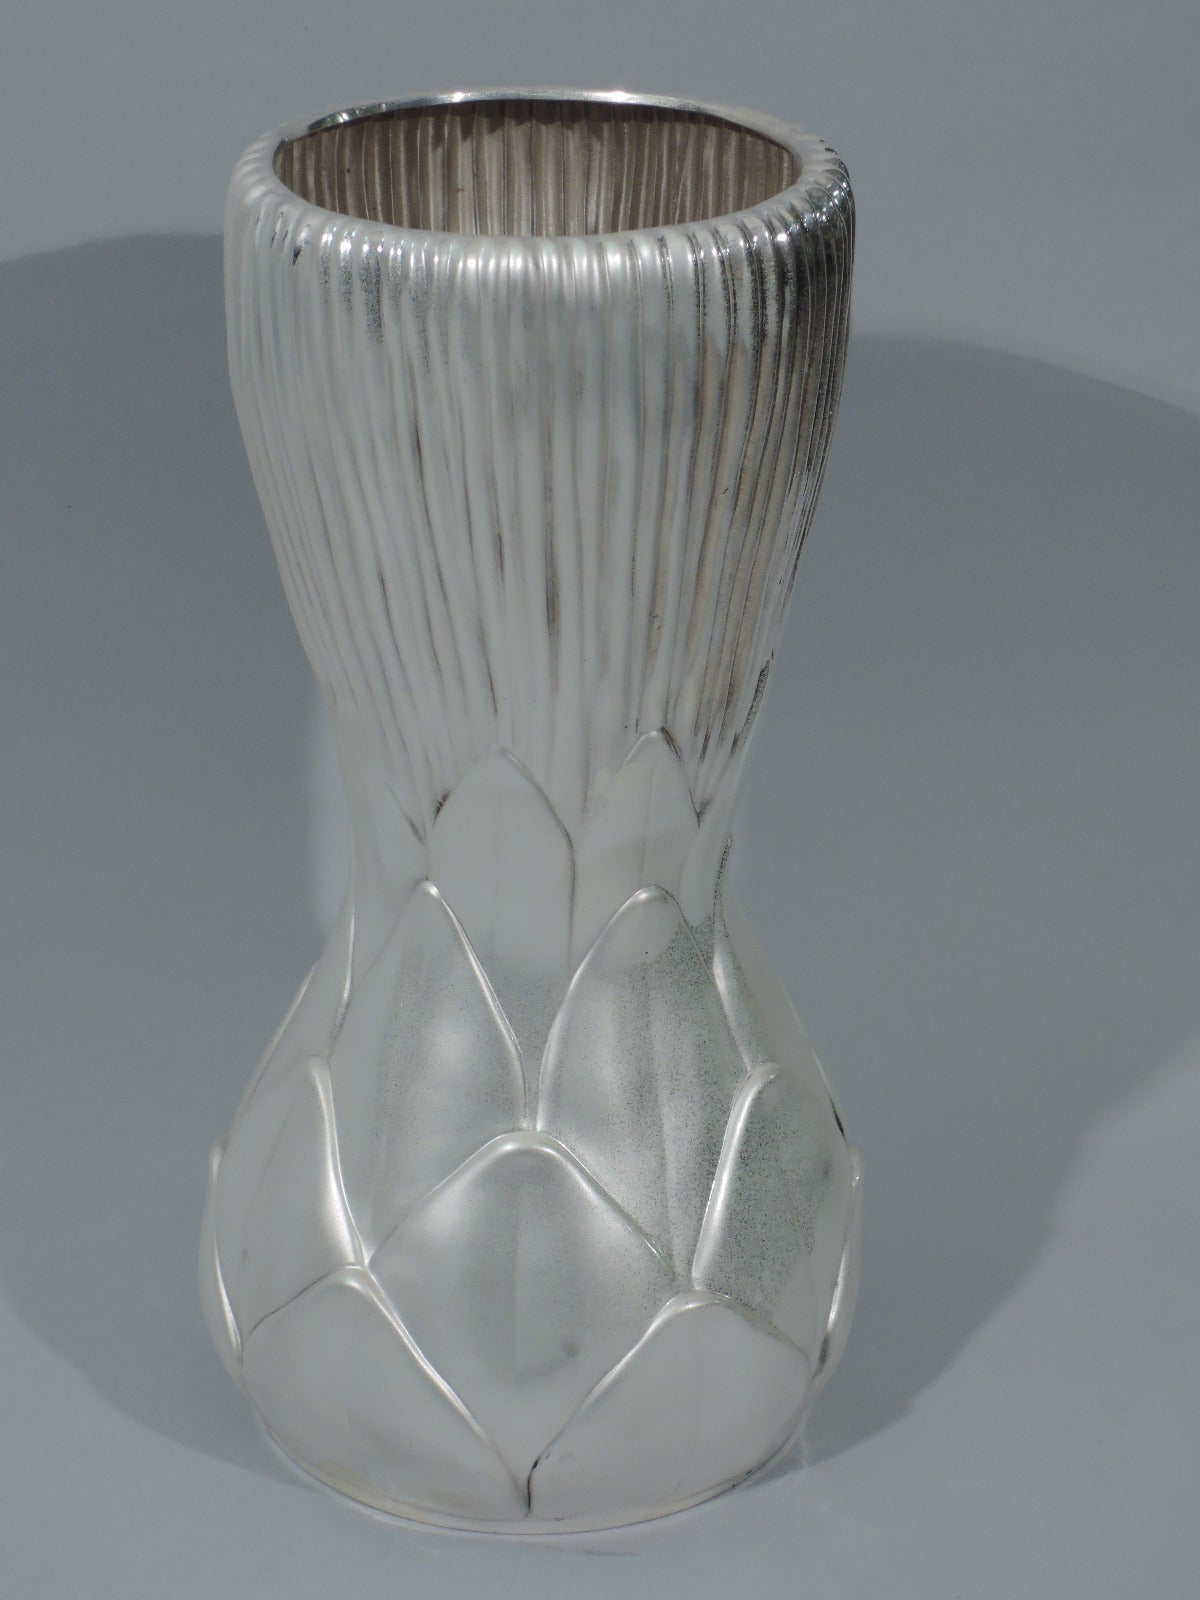 Unusual sterling silver vase. Made by Tiffany & Co. in New York, circa 1992. Round with softly chased abstract foliage and flared and reeded top. Concave middle. Hallmark includes copyright date 1992 and phrase “Tiffany Studios Collection Designed